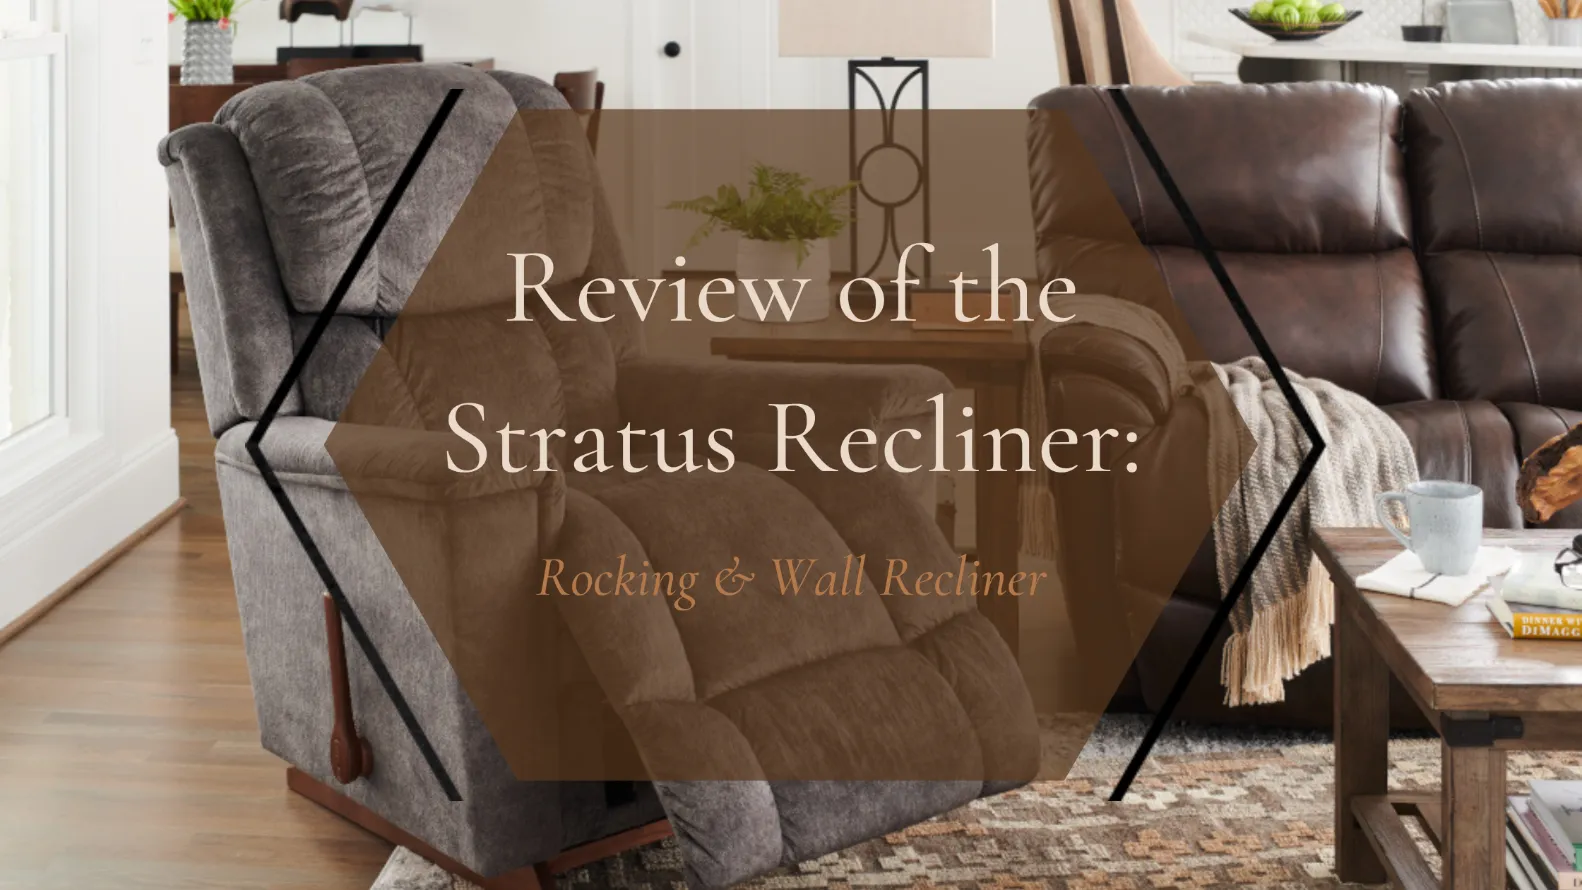 Review of the La-Z-Boy Stratus Recliner: Rocking & Wall Recliner